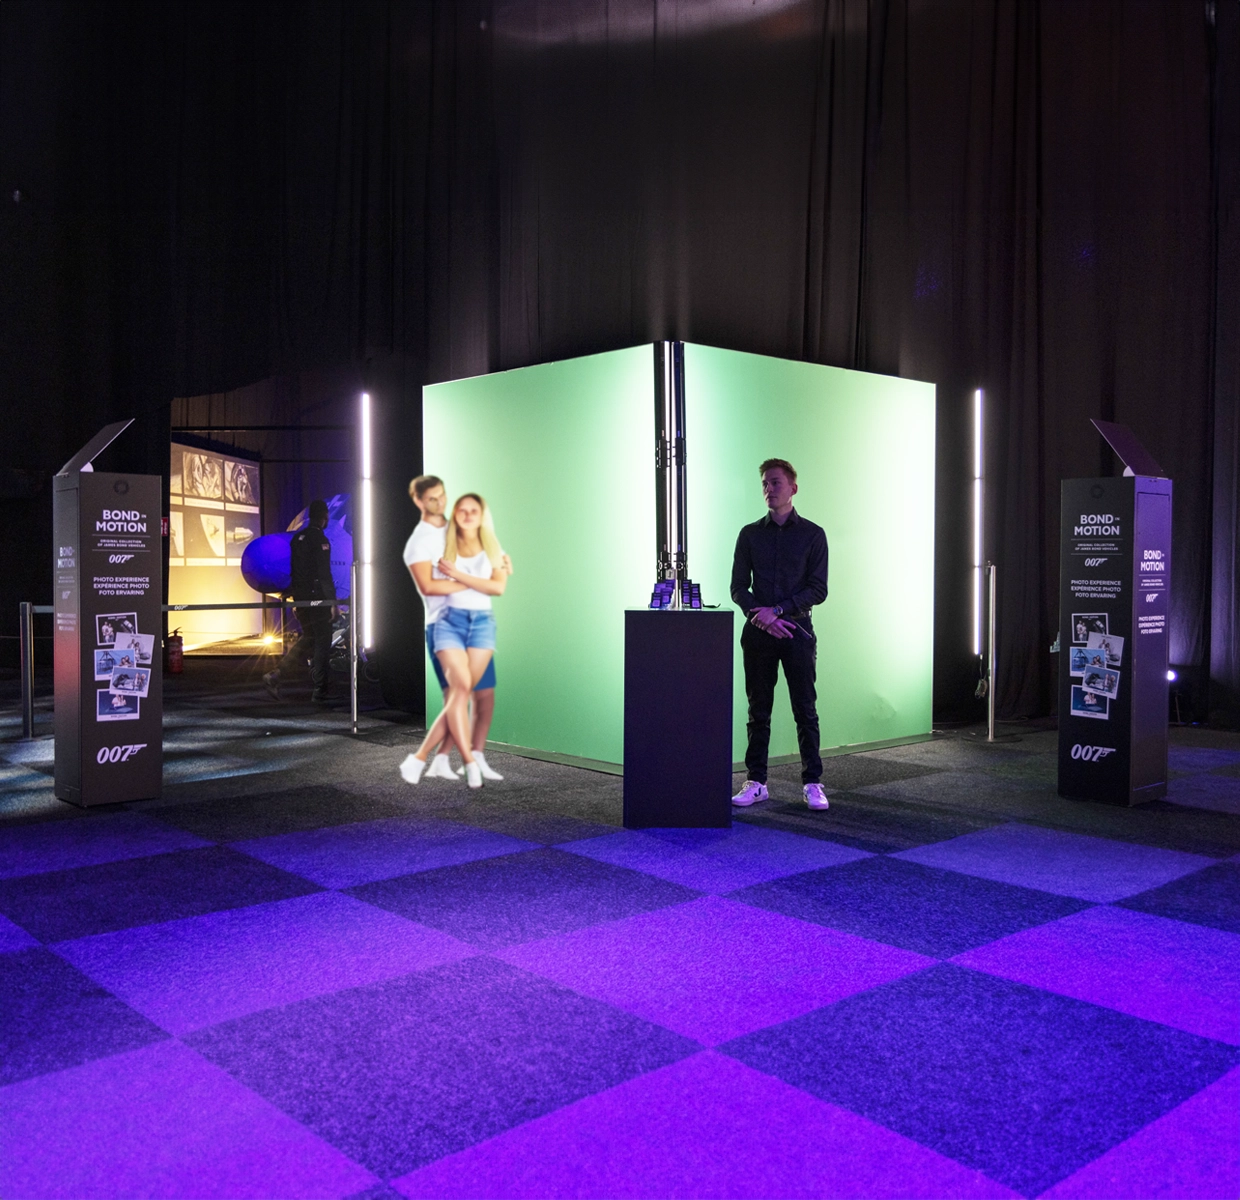 A couple posing for a photo in front of a green screen at the 'Bond in Motion' exhibit's automated photo studio